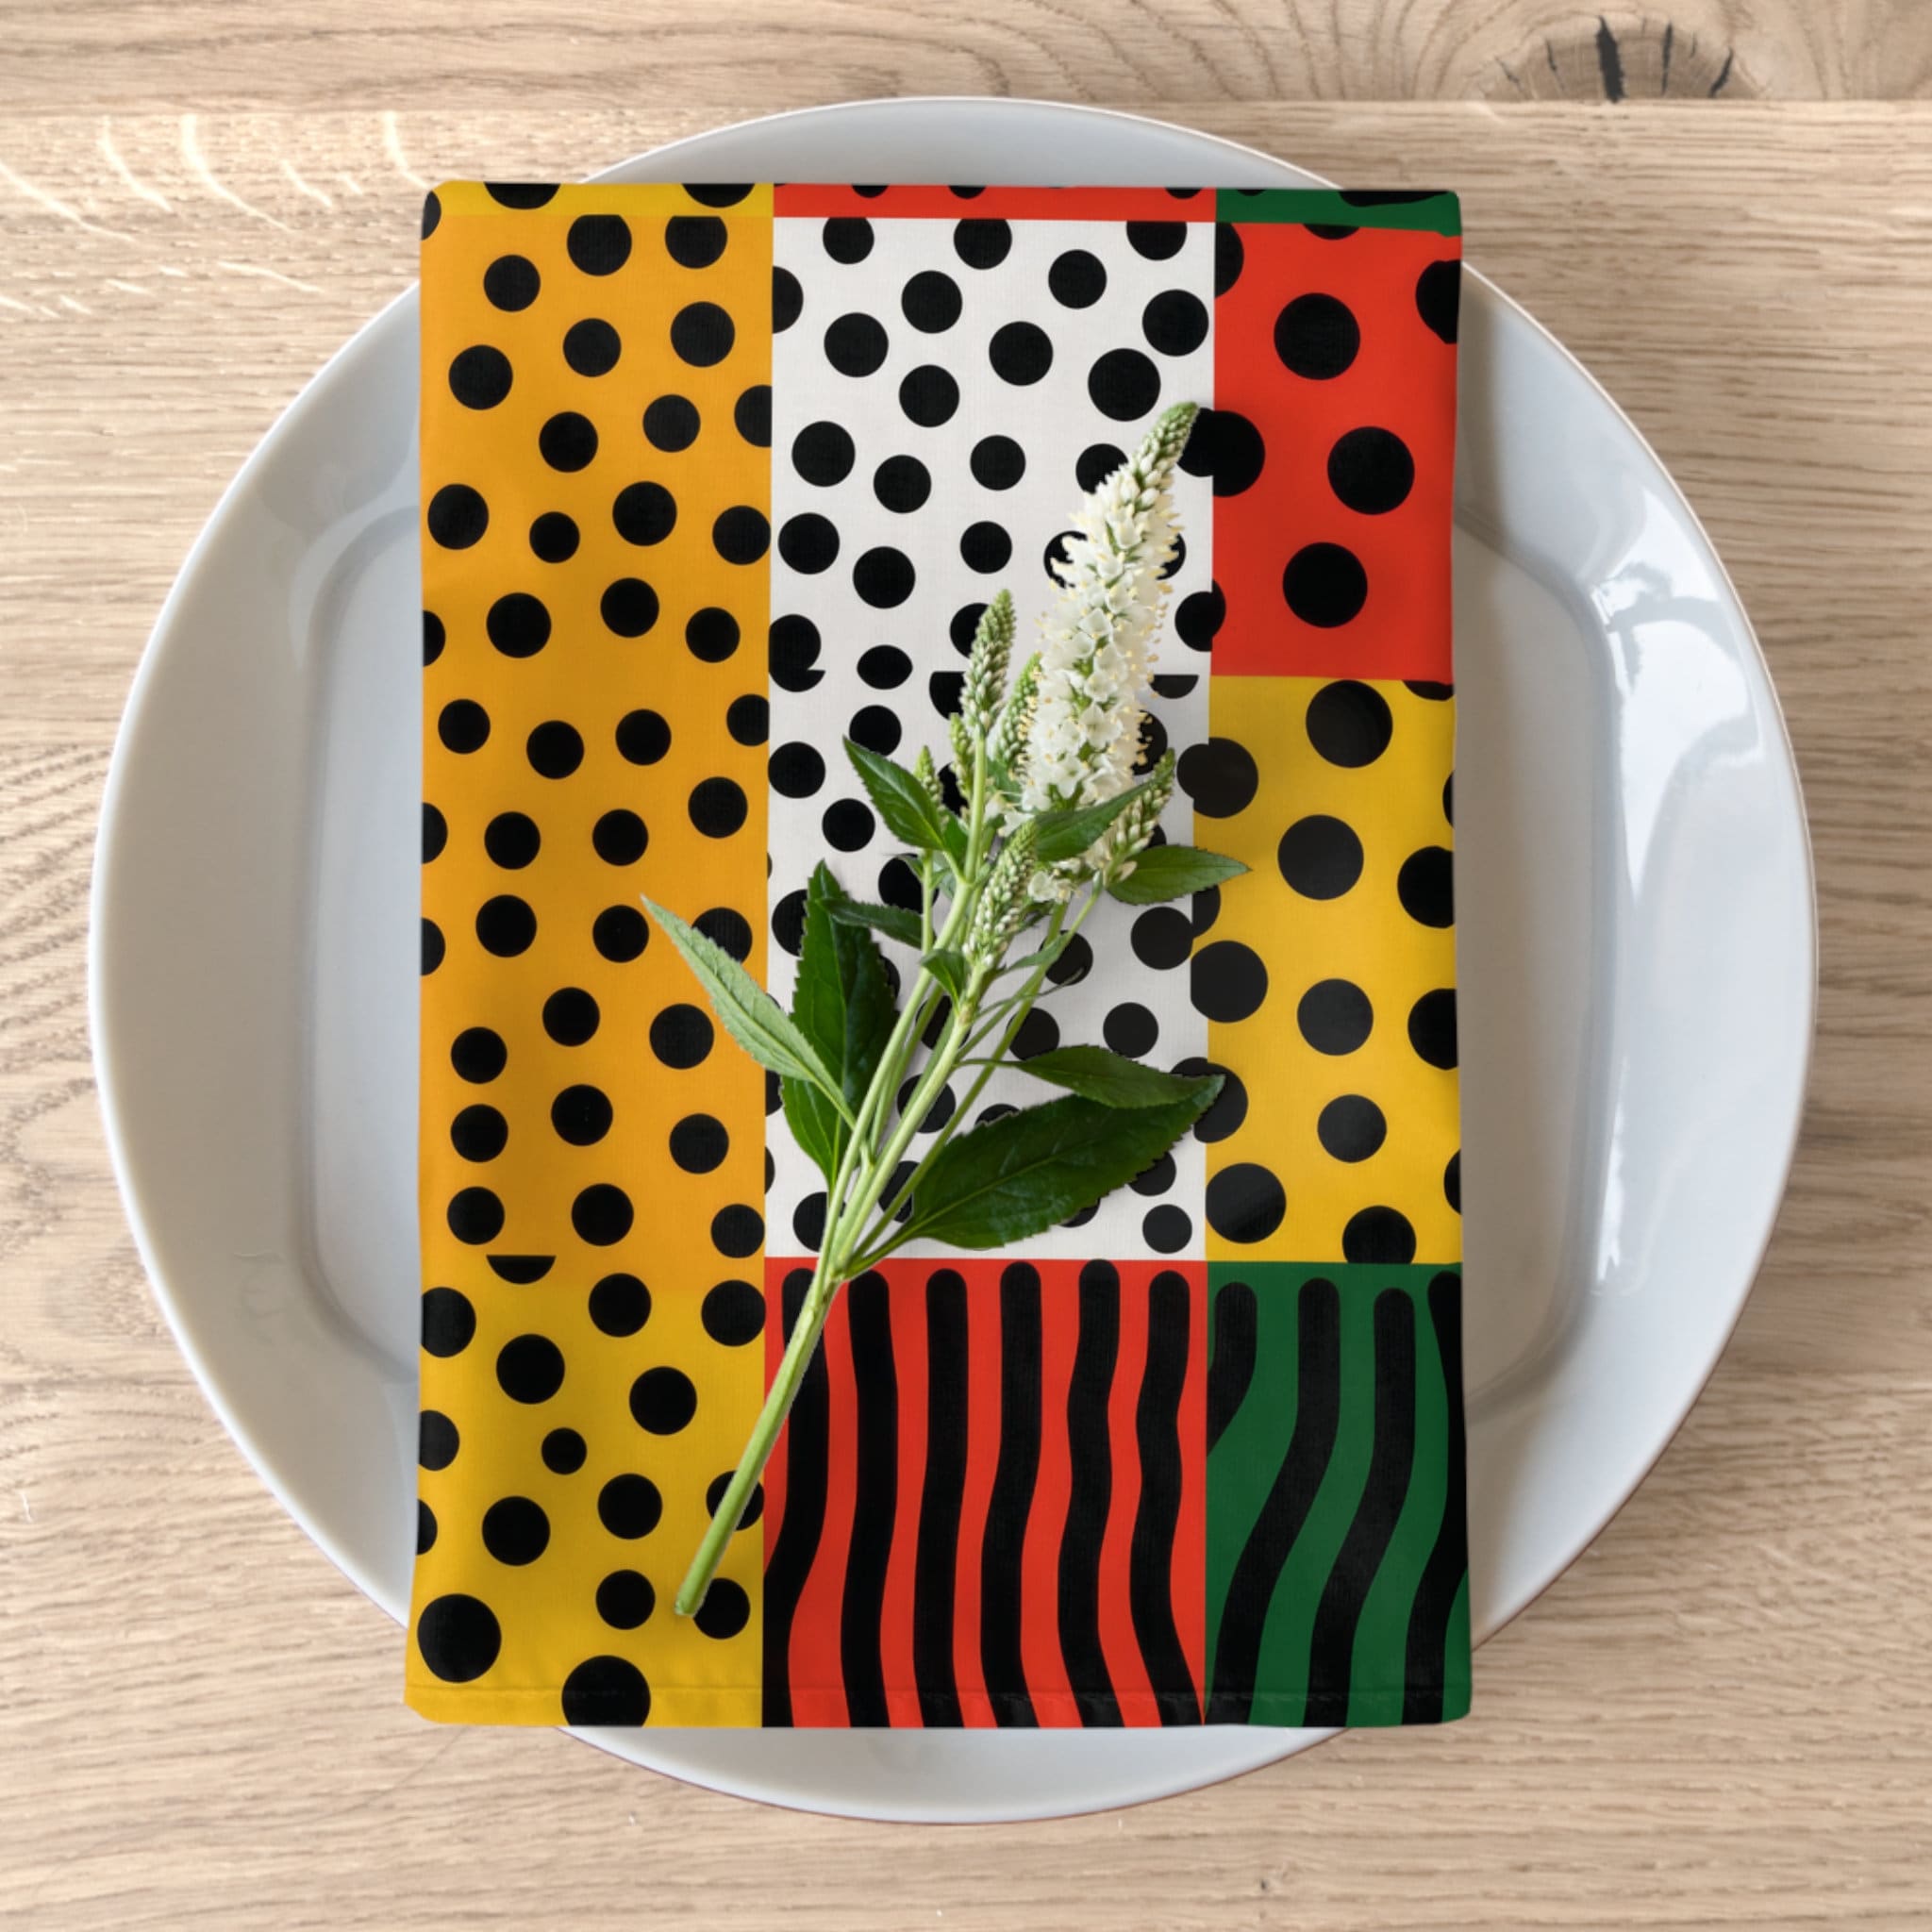 Kwanzaa Wrapping Paper Black Owned Gifts African American FBA Culture  Kinara Pattern Afrocentric Pattern Gift Wrap 